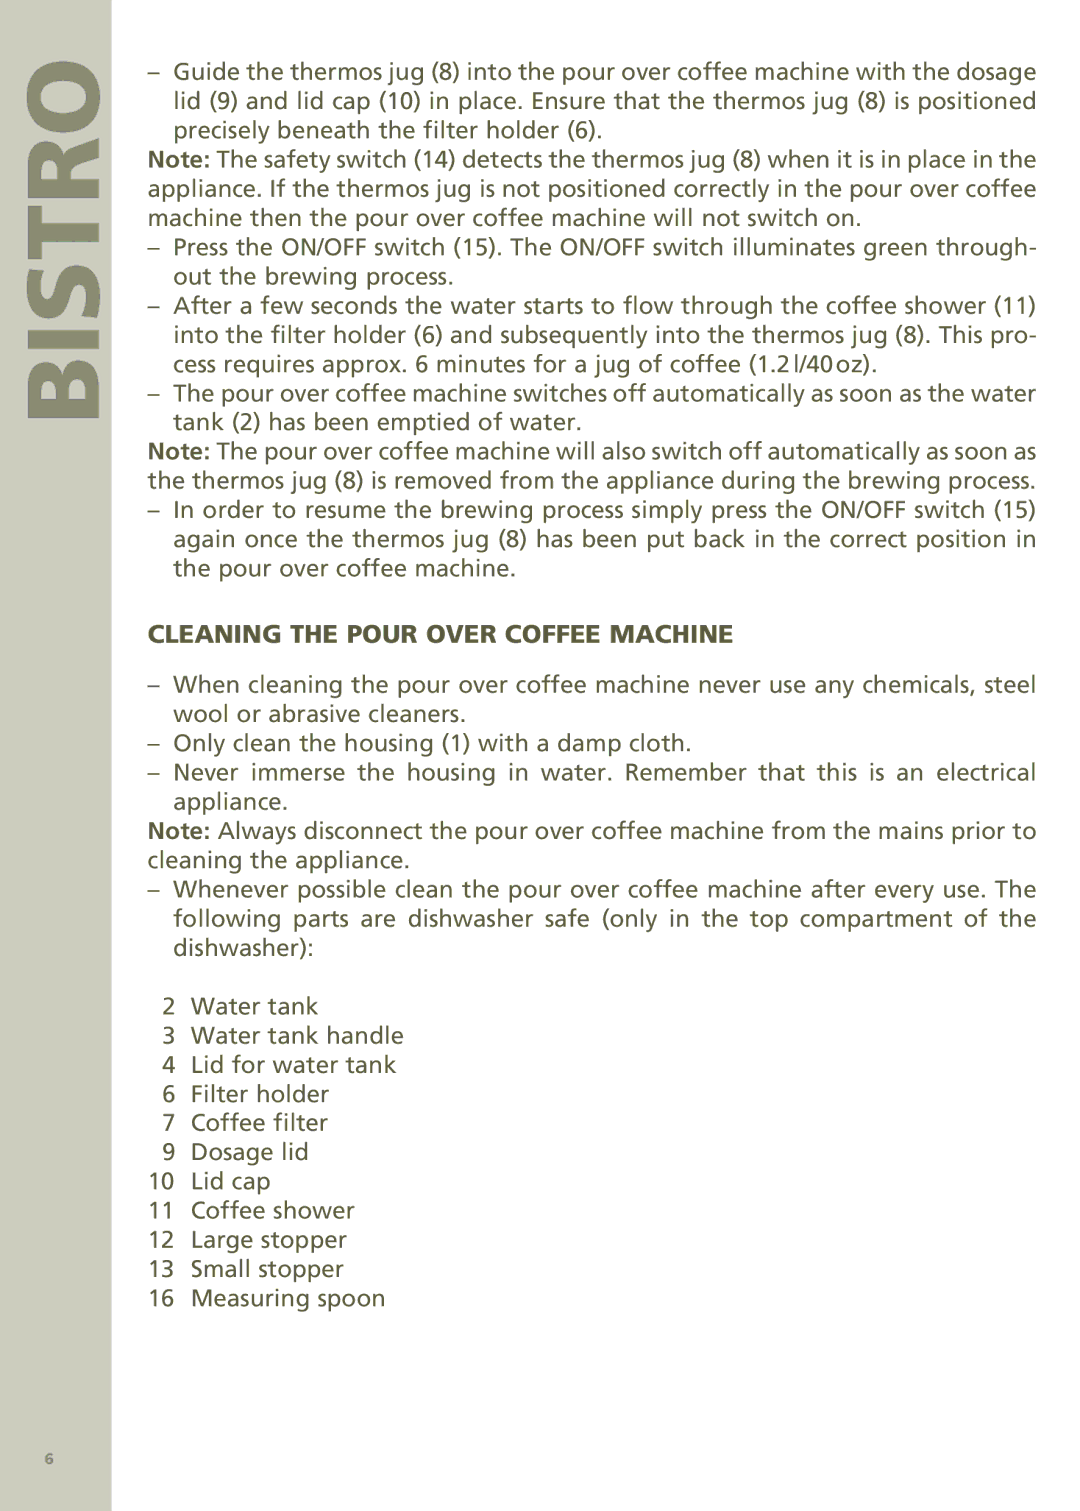 Bodum 11001 manual Cleaning the Pour over coffee machine 